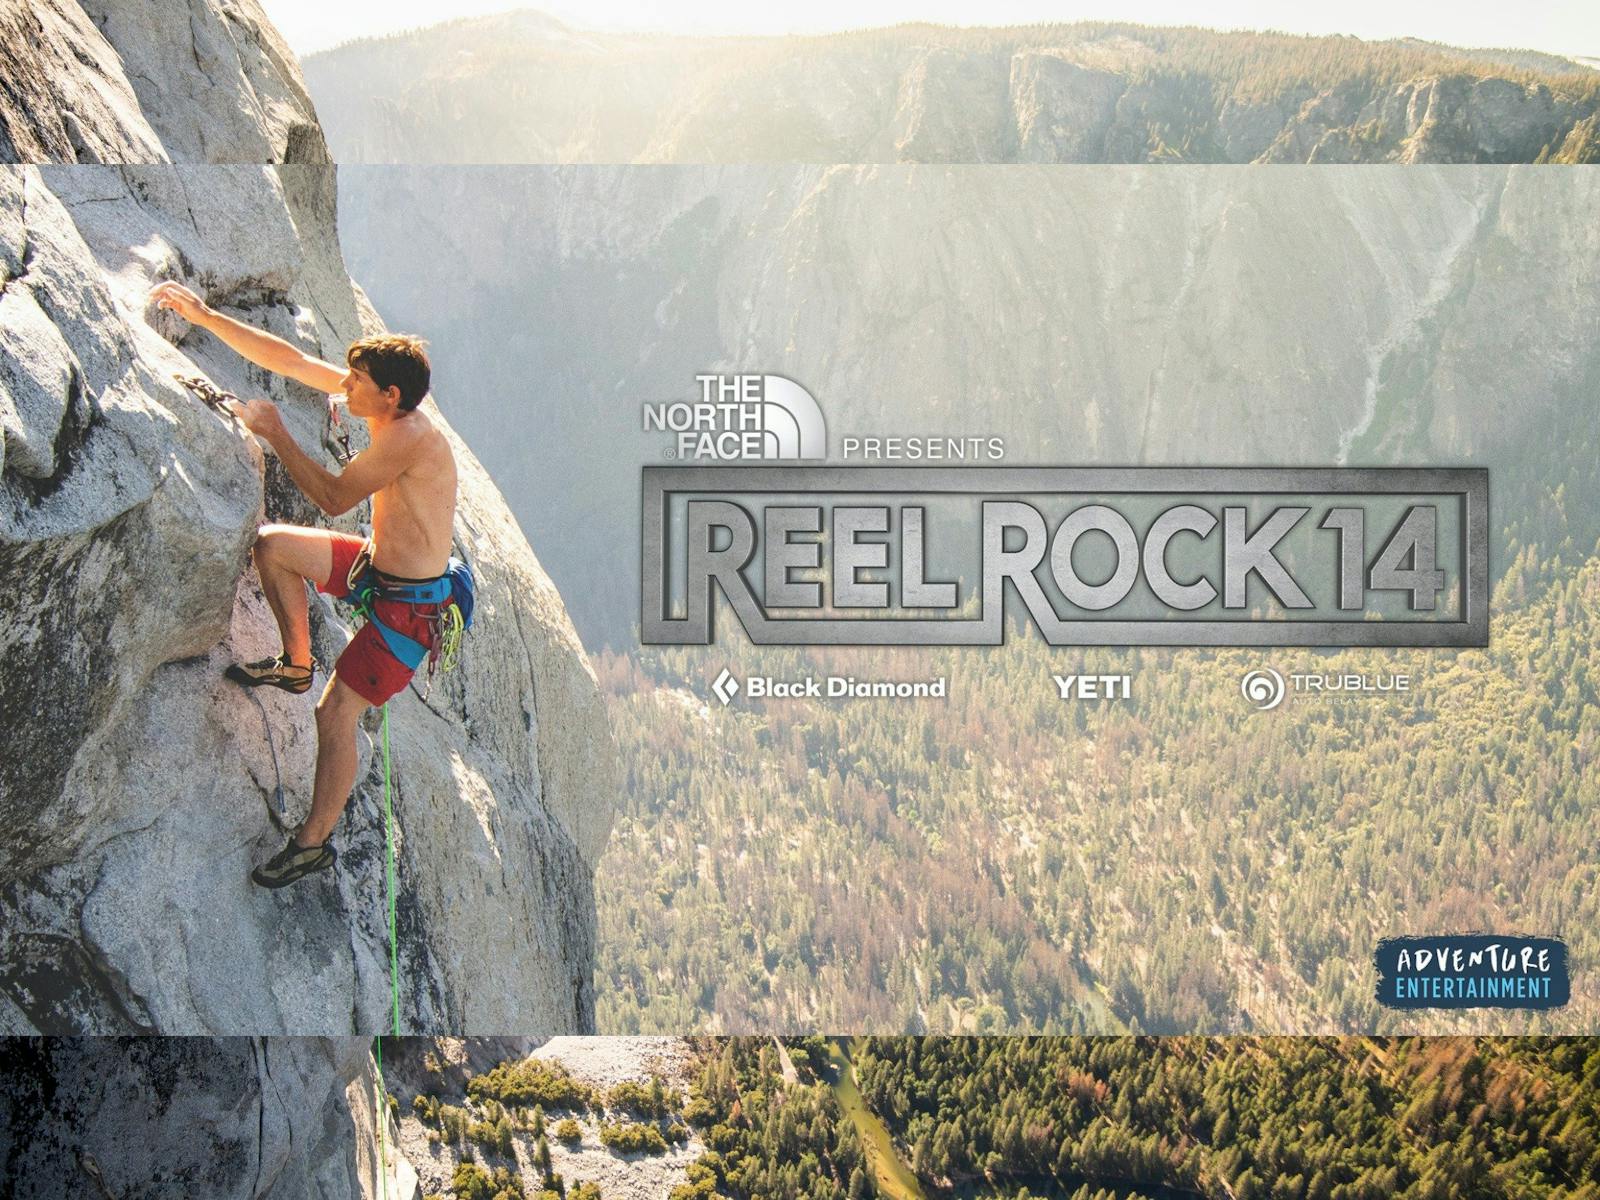 Image for Reel Rock 14 - Coffs Harbour, presented by The North Face